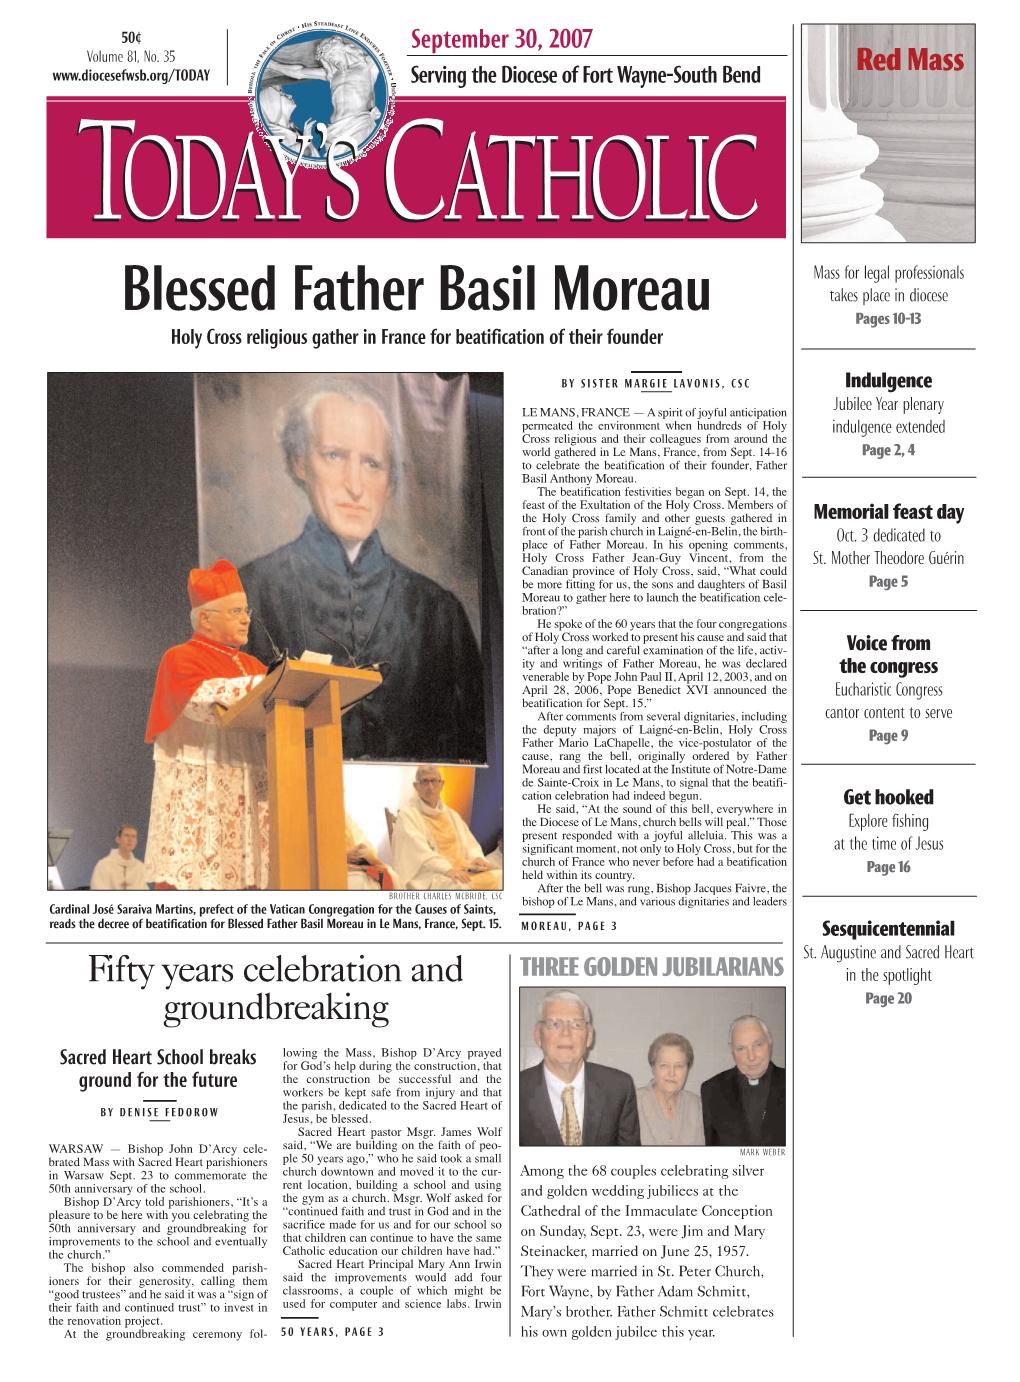 Blessed Father Basil Moreau Takes Place in Diocese Pages 10-13 Holy Cross Religious Gather in France for Beatification of Their Founder